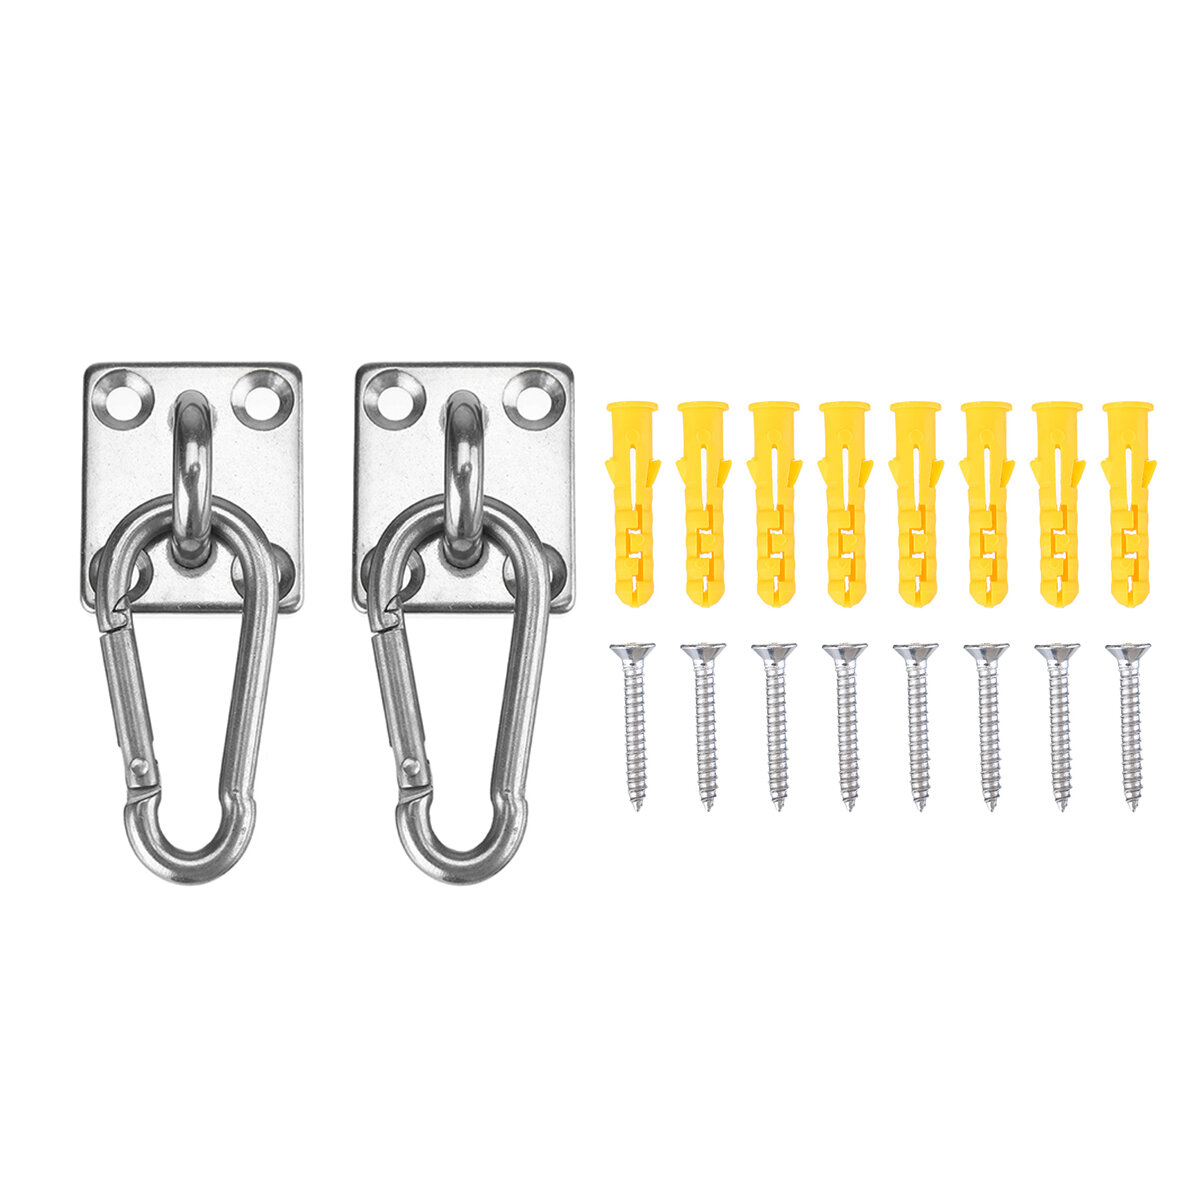 

2 Sets Of Suspended Ceiling Wall Mount U-Shaped Hooks Stainless Steel Heavy Duty